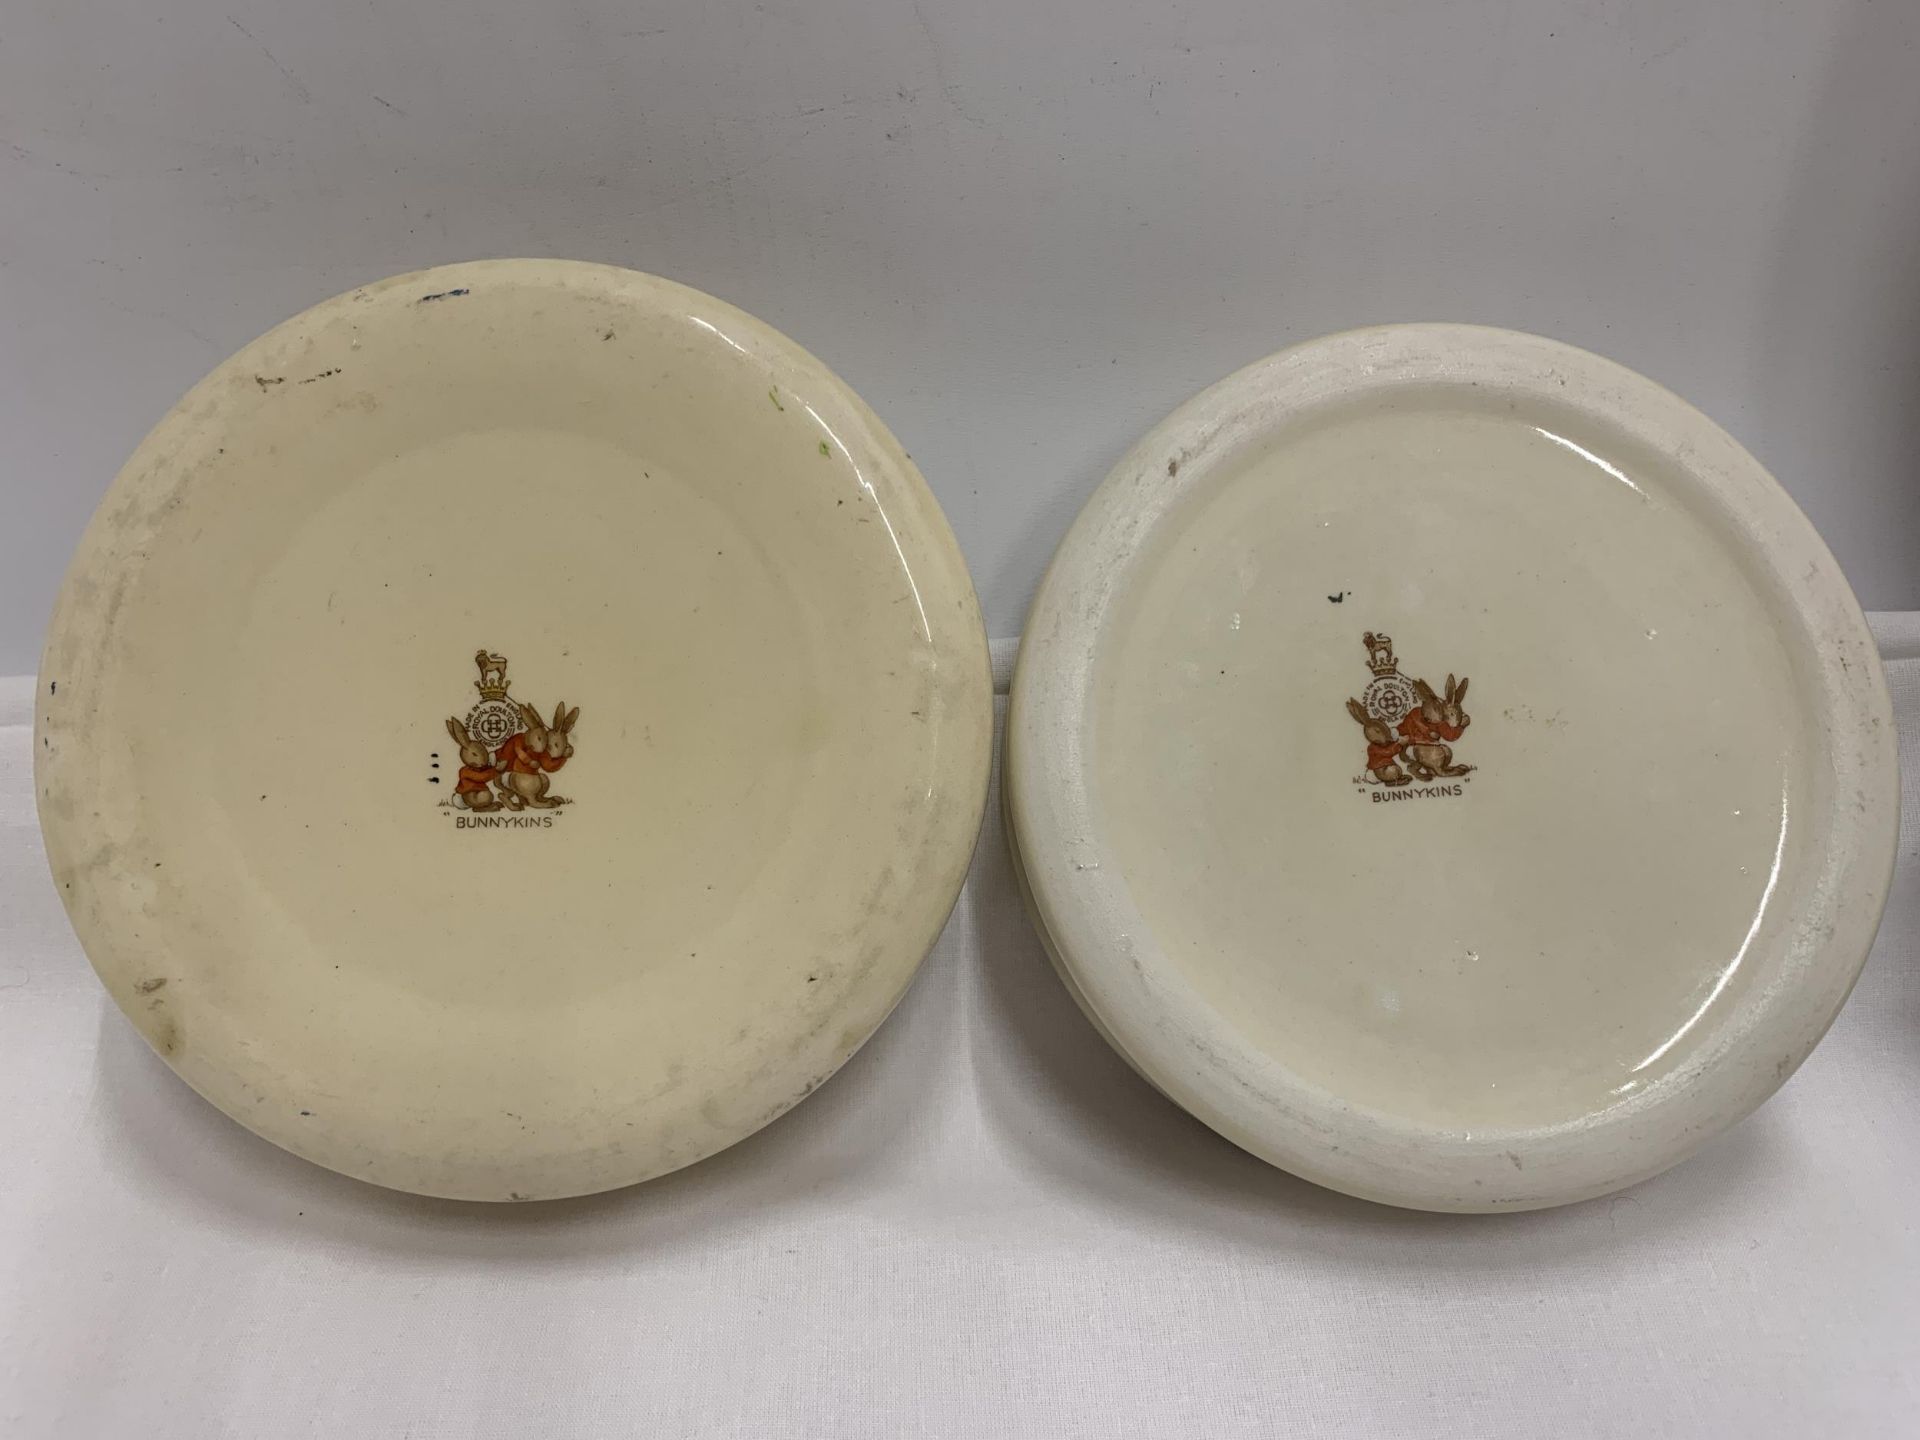 TWO ROYAL DOULTON BUNNYKINS DEEP IVORY GLAZED EARTHENWARE BABY PLATES "MEDICINE TIME" PRODUCED UNTIL - Image 4 of 4